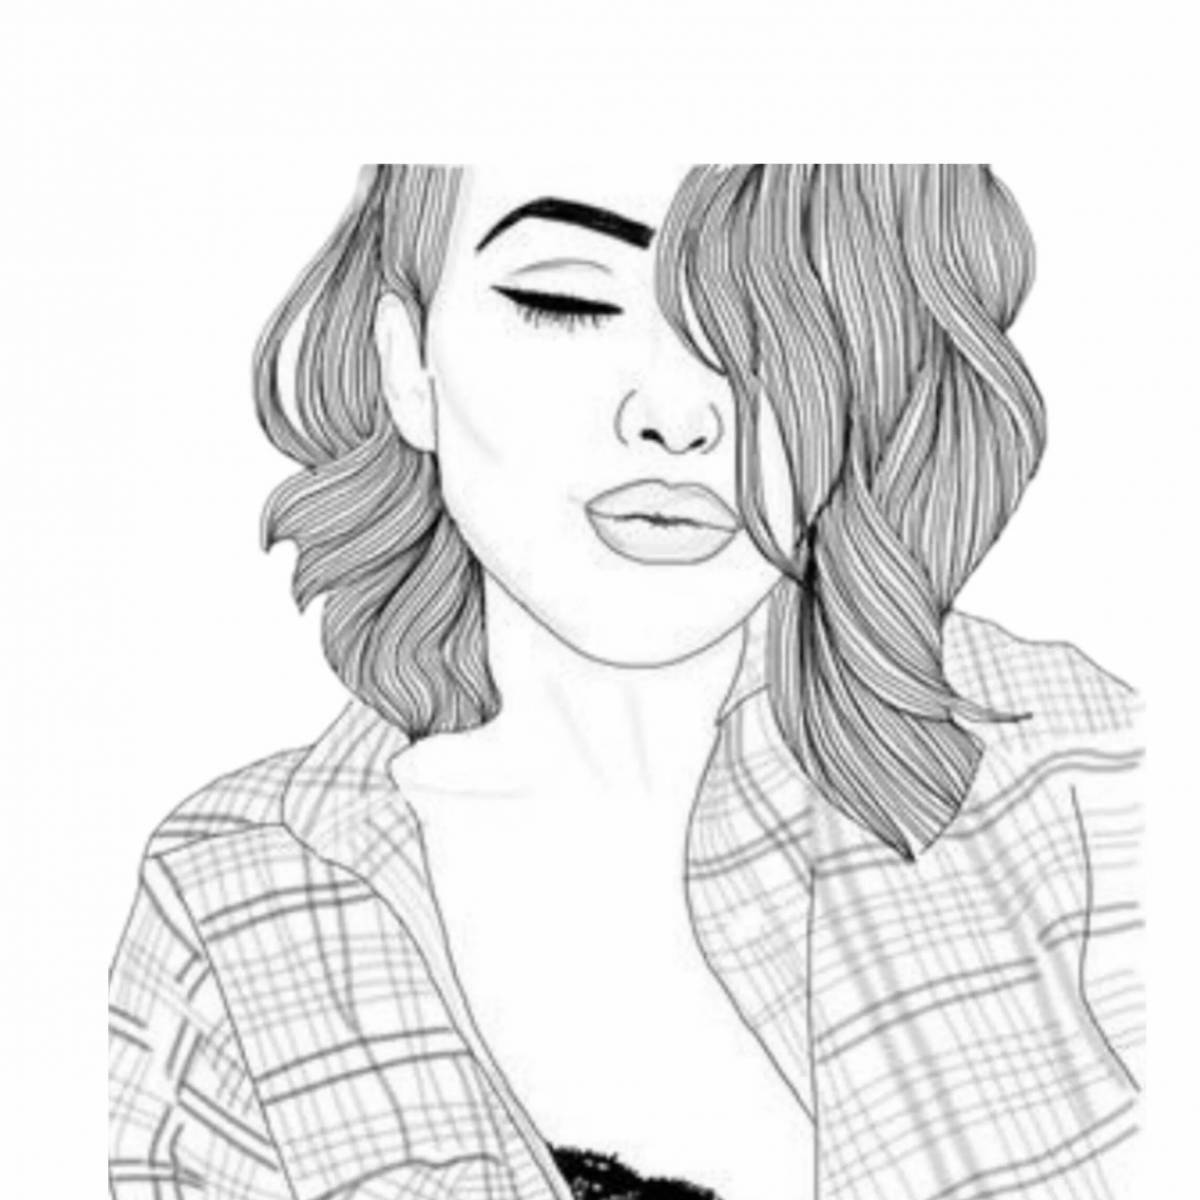 Stylish realistic people coloring book